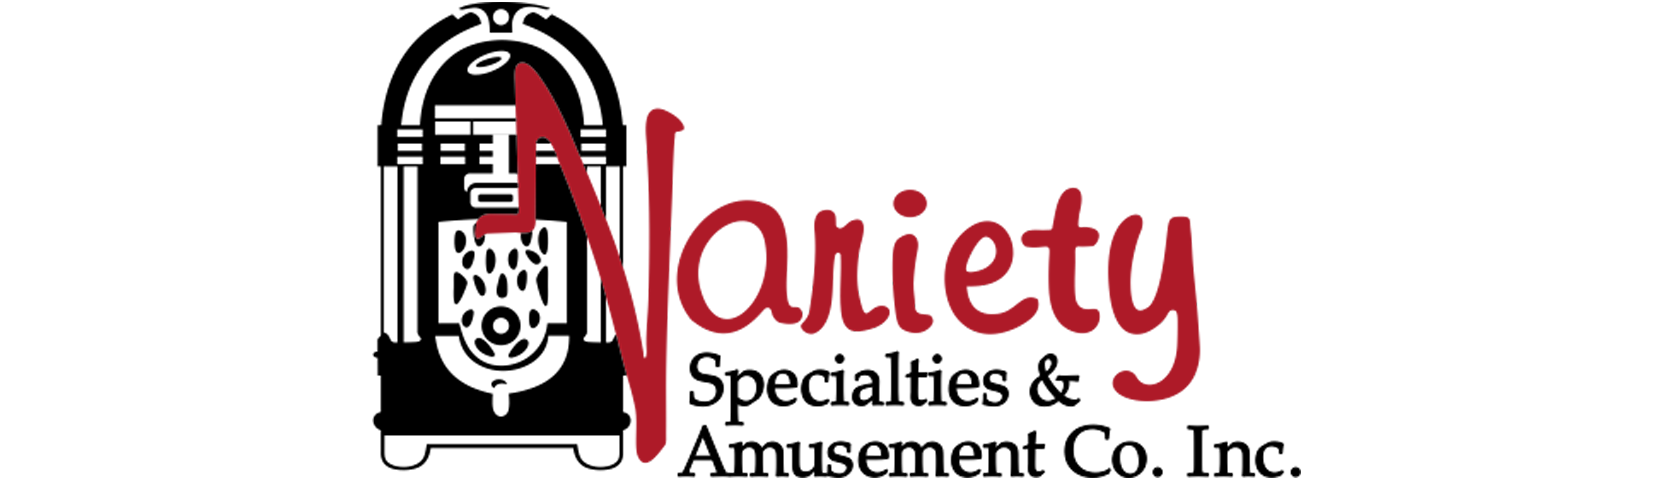 Variety Specialties and Amusement Co., Inc.